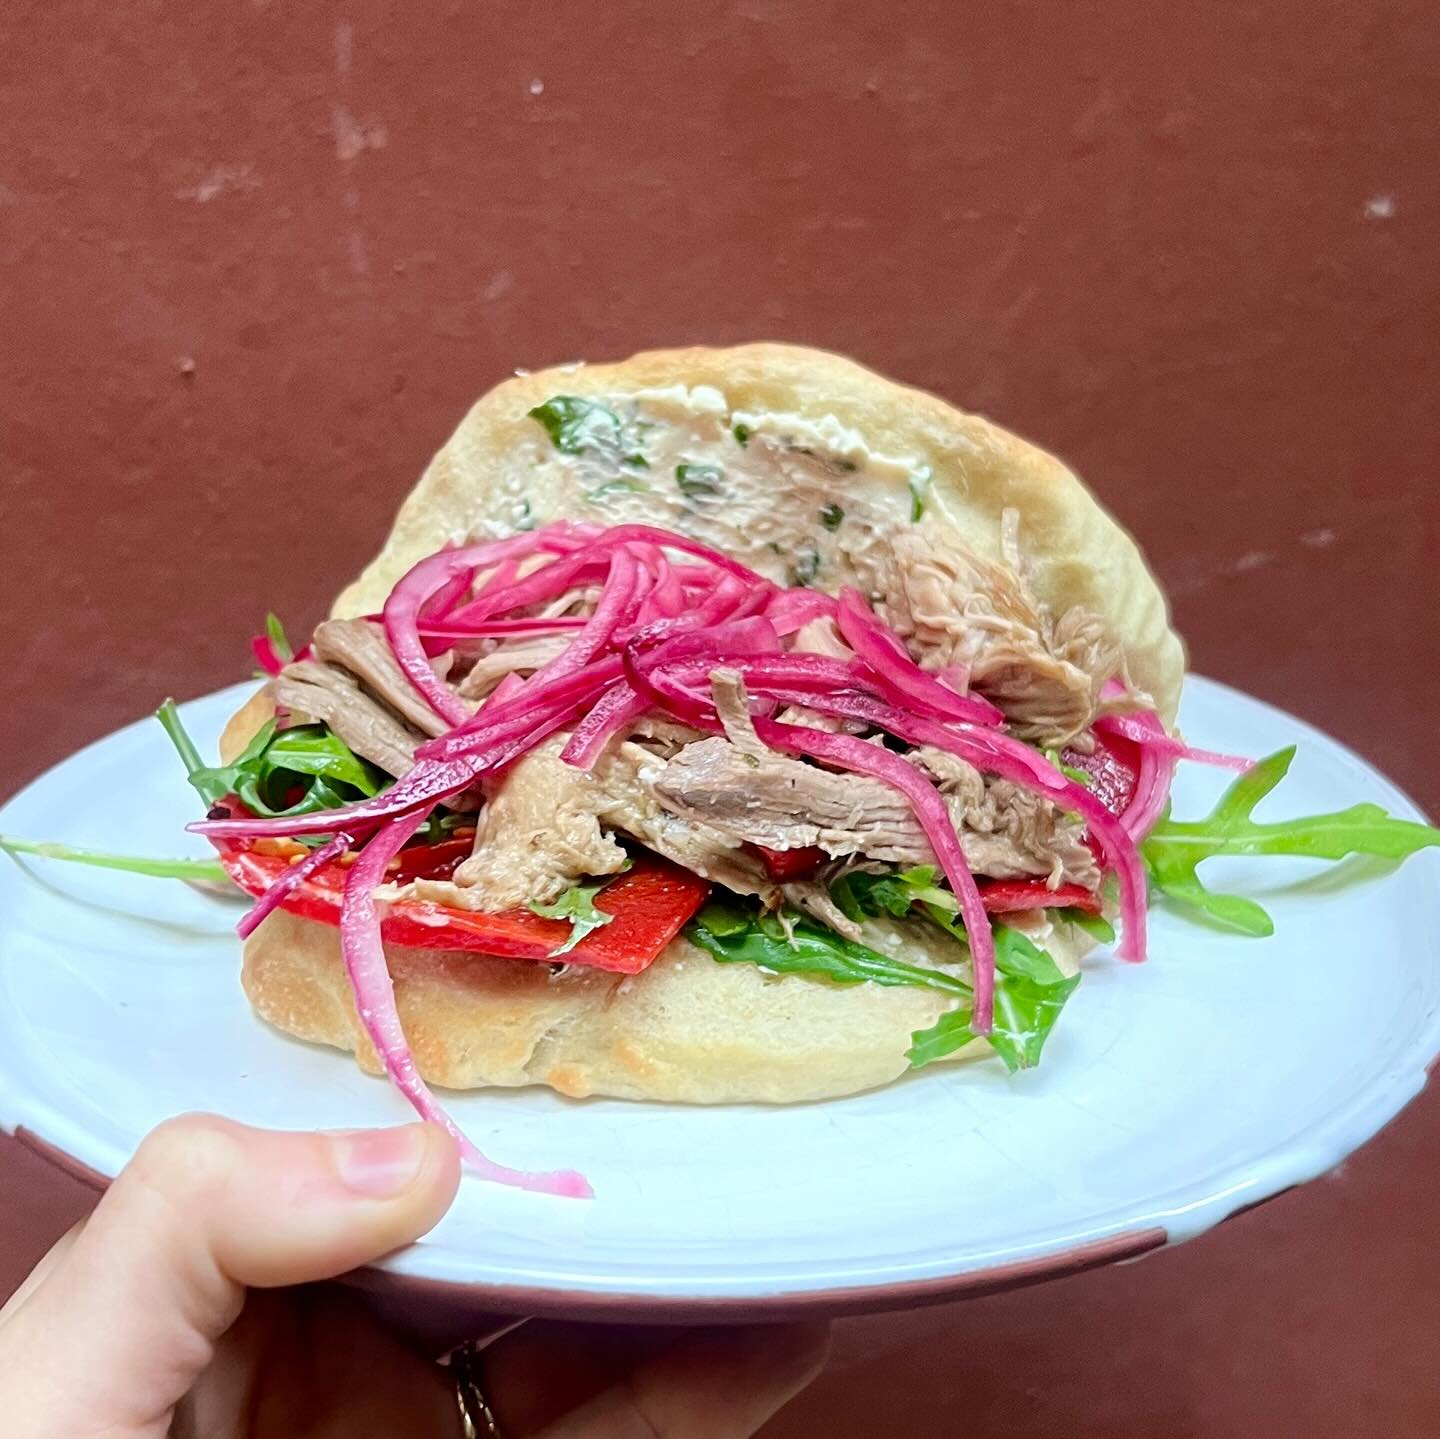 New sandwich special:
Homemade flatbread with slow cooked pulled lamb, roaster red bell peppers, whipped feta &amp; pickled red onions

&bull;&bull;&bull;

Des d&rsquo;avui nou entrep&agrave;! 
Pa de pita casol&agrave; amb xai cuit a baixa temperatur